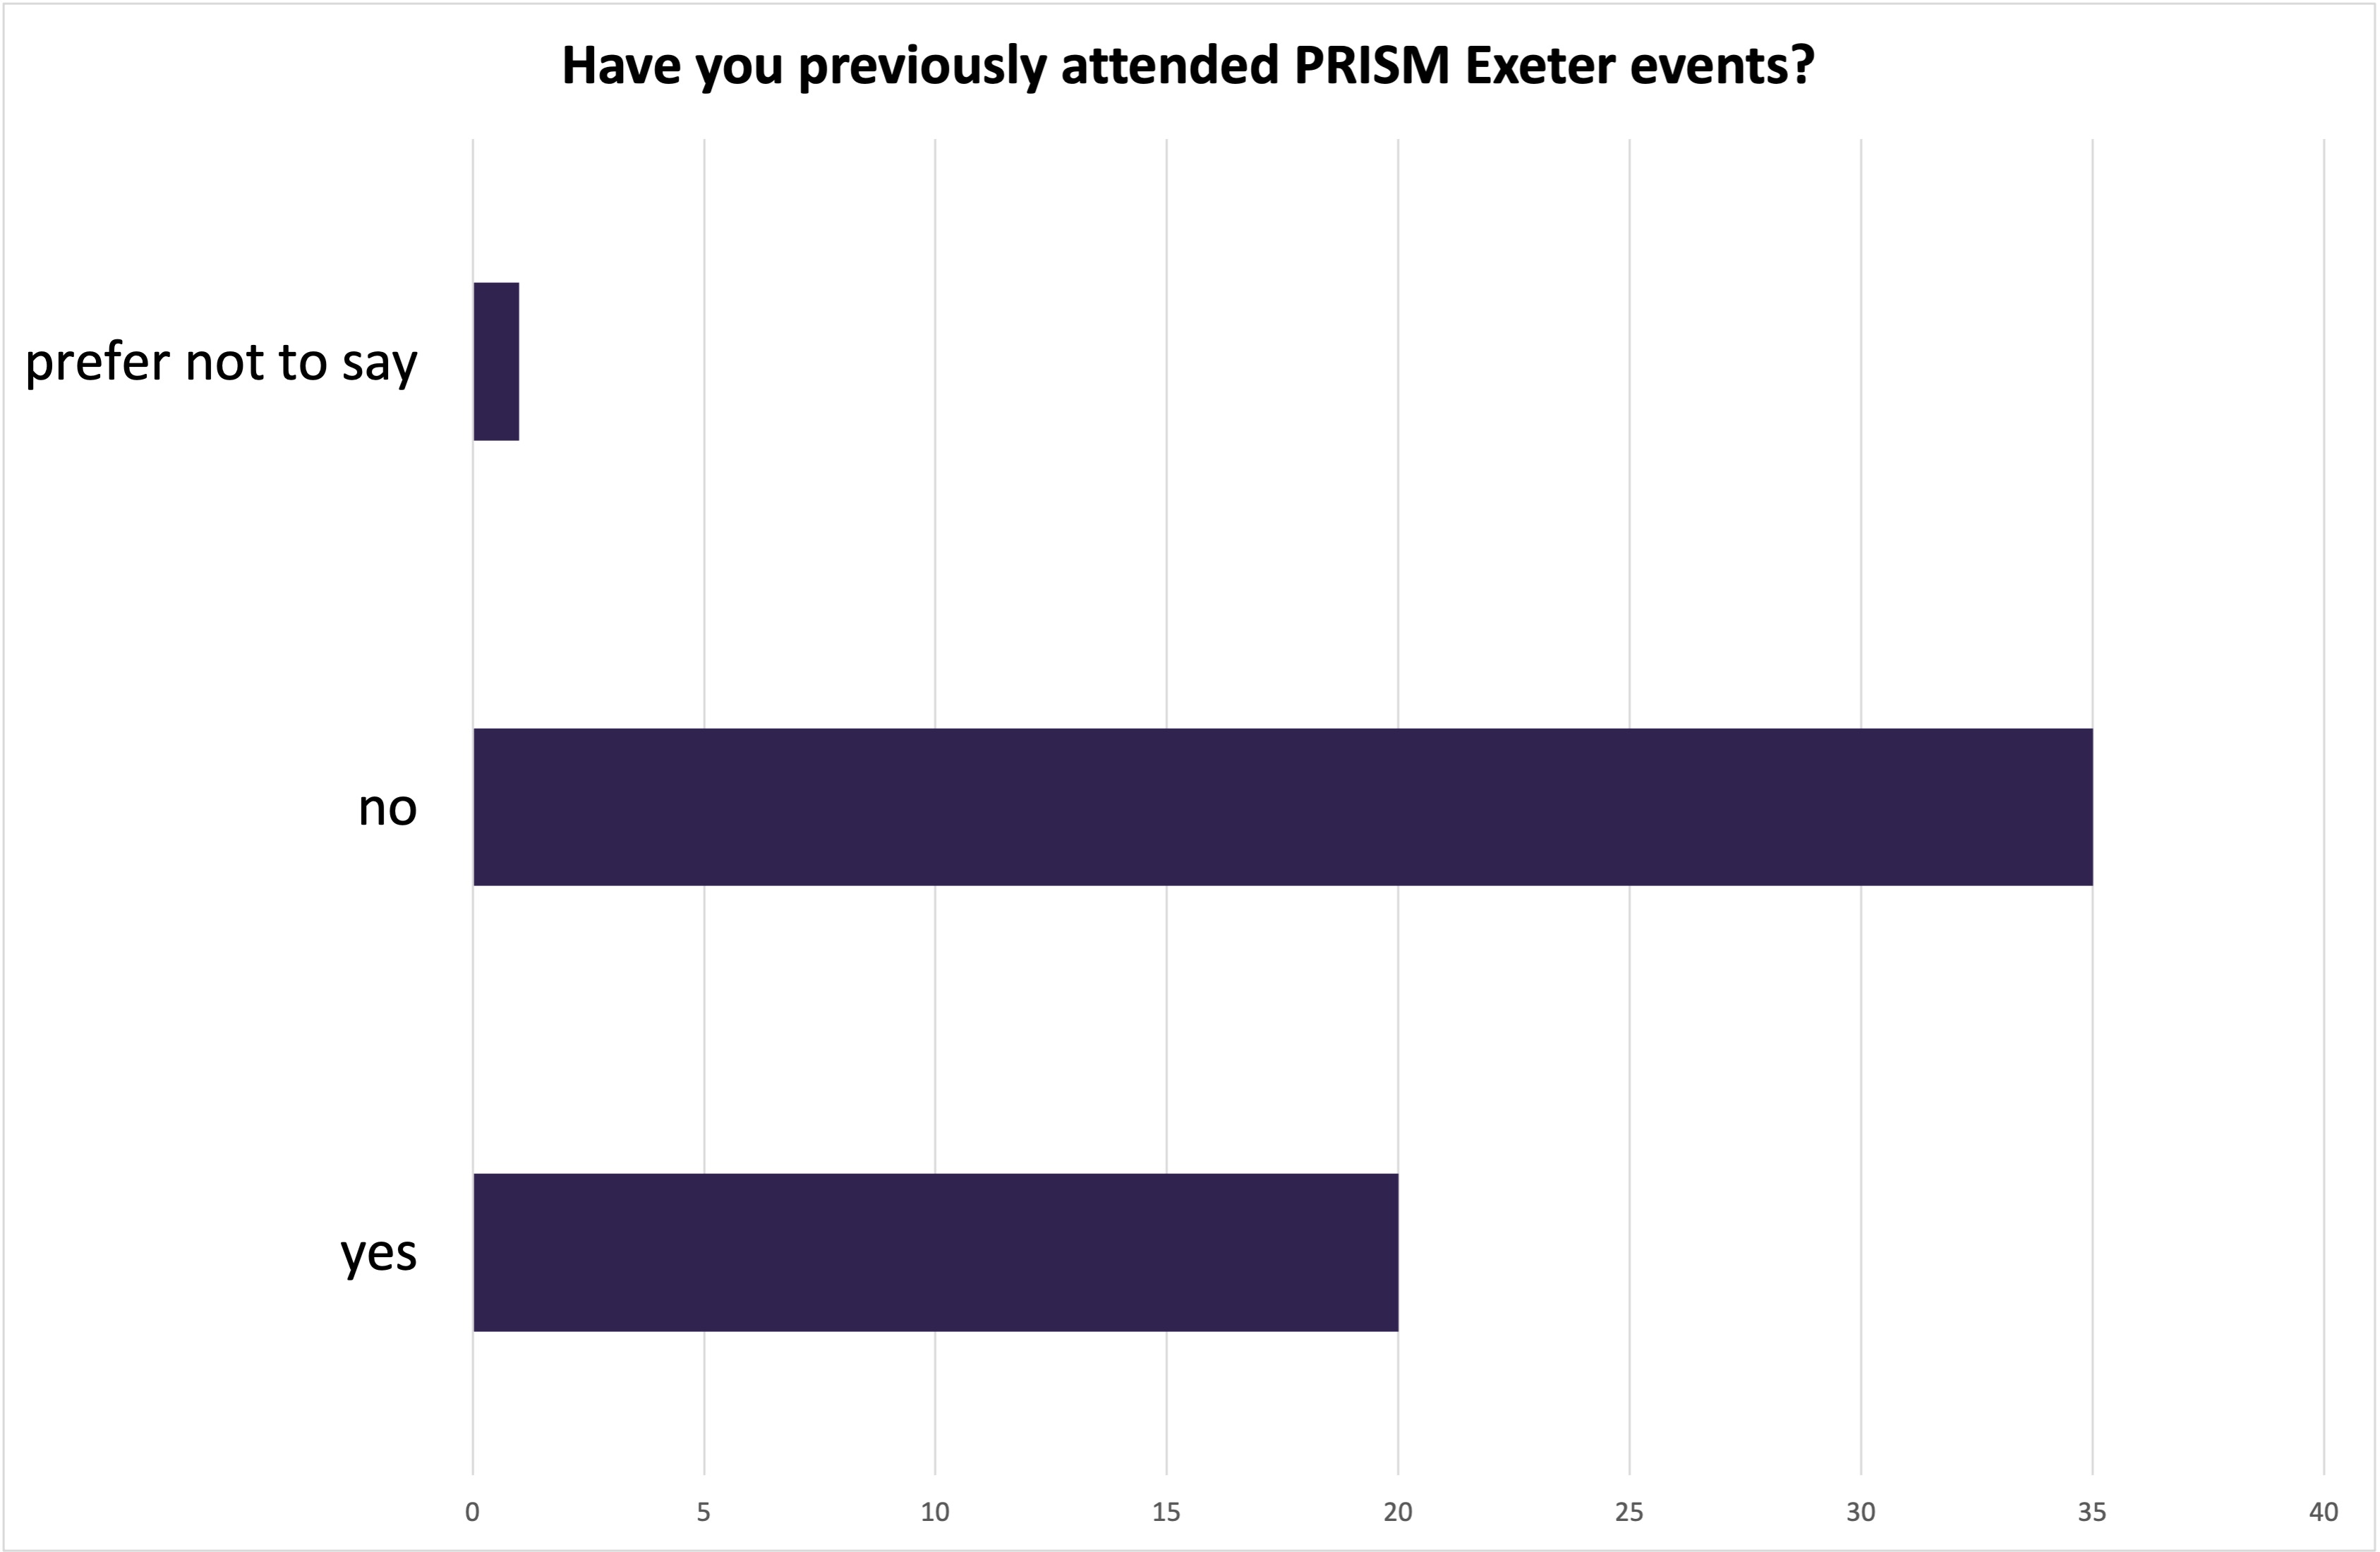 Bar chart of registrants' responses to the question 'Have you previously attended PRISM Exeter events?': 20 responded 'yes'; 35 responded 'no'; 1 prefered not to say.